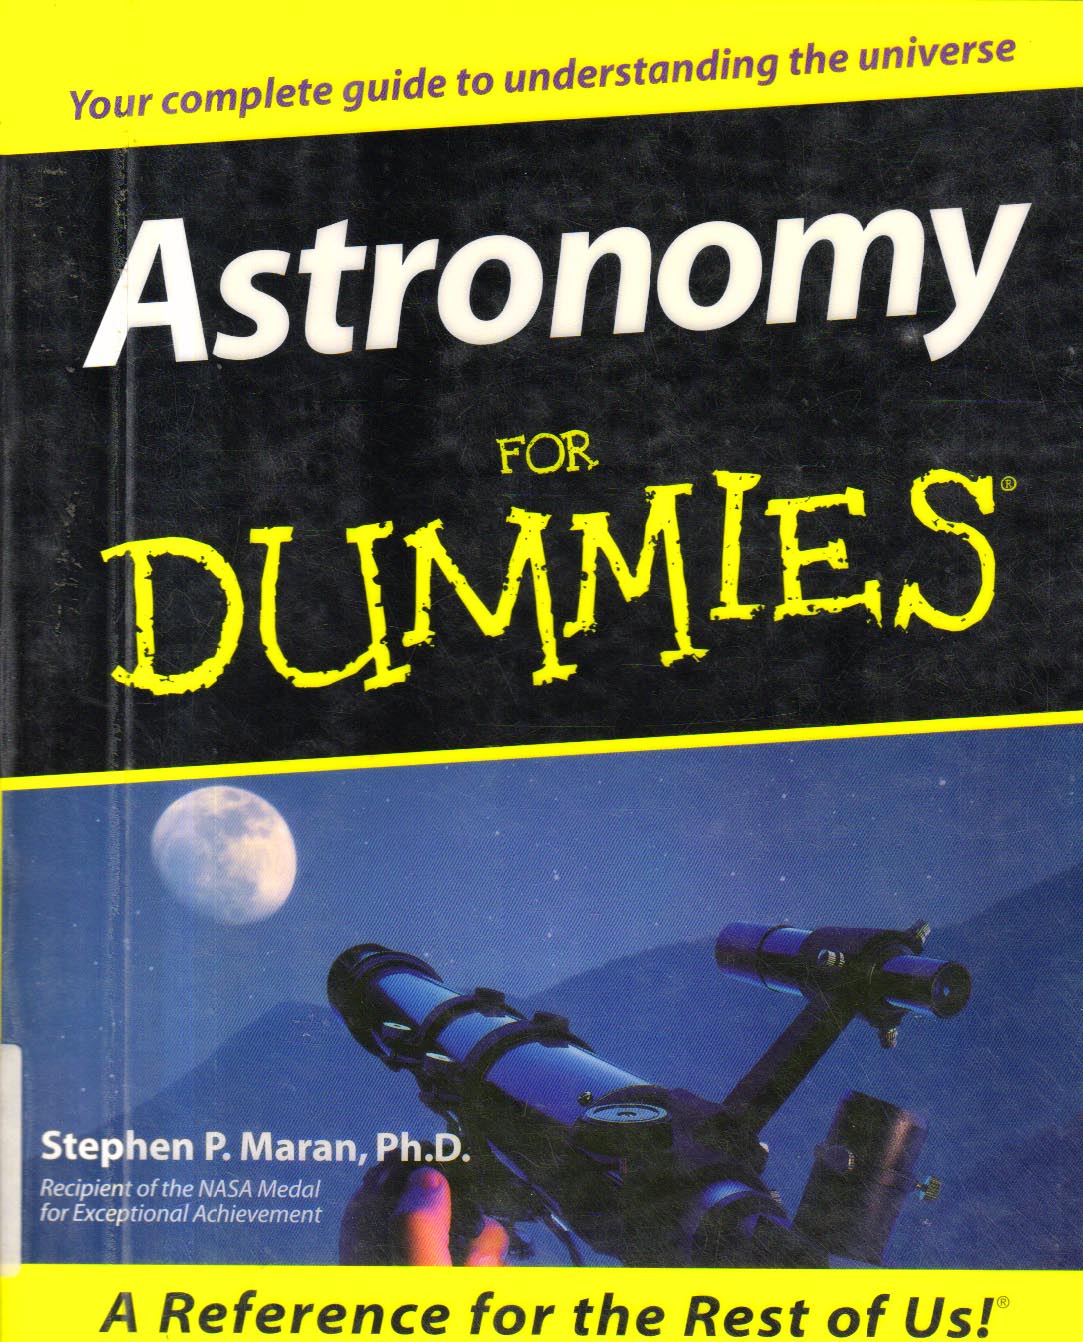 Astronomy for Dummies.